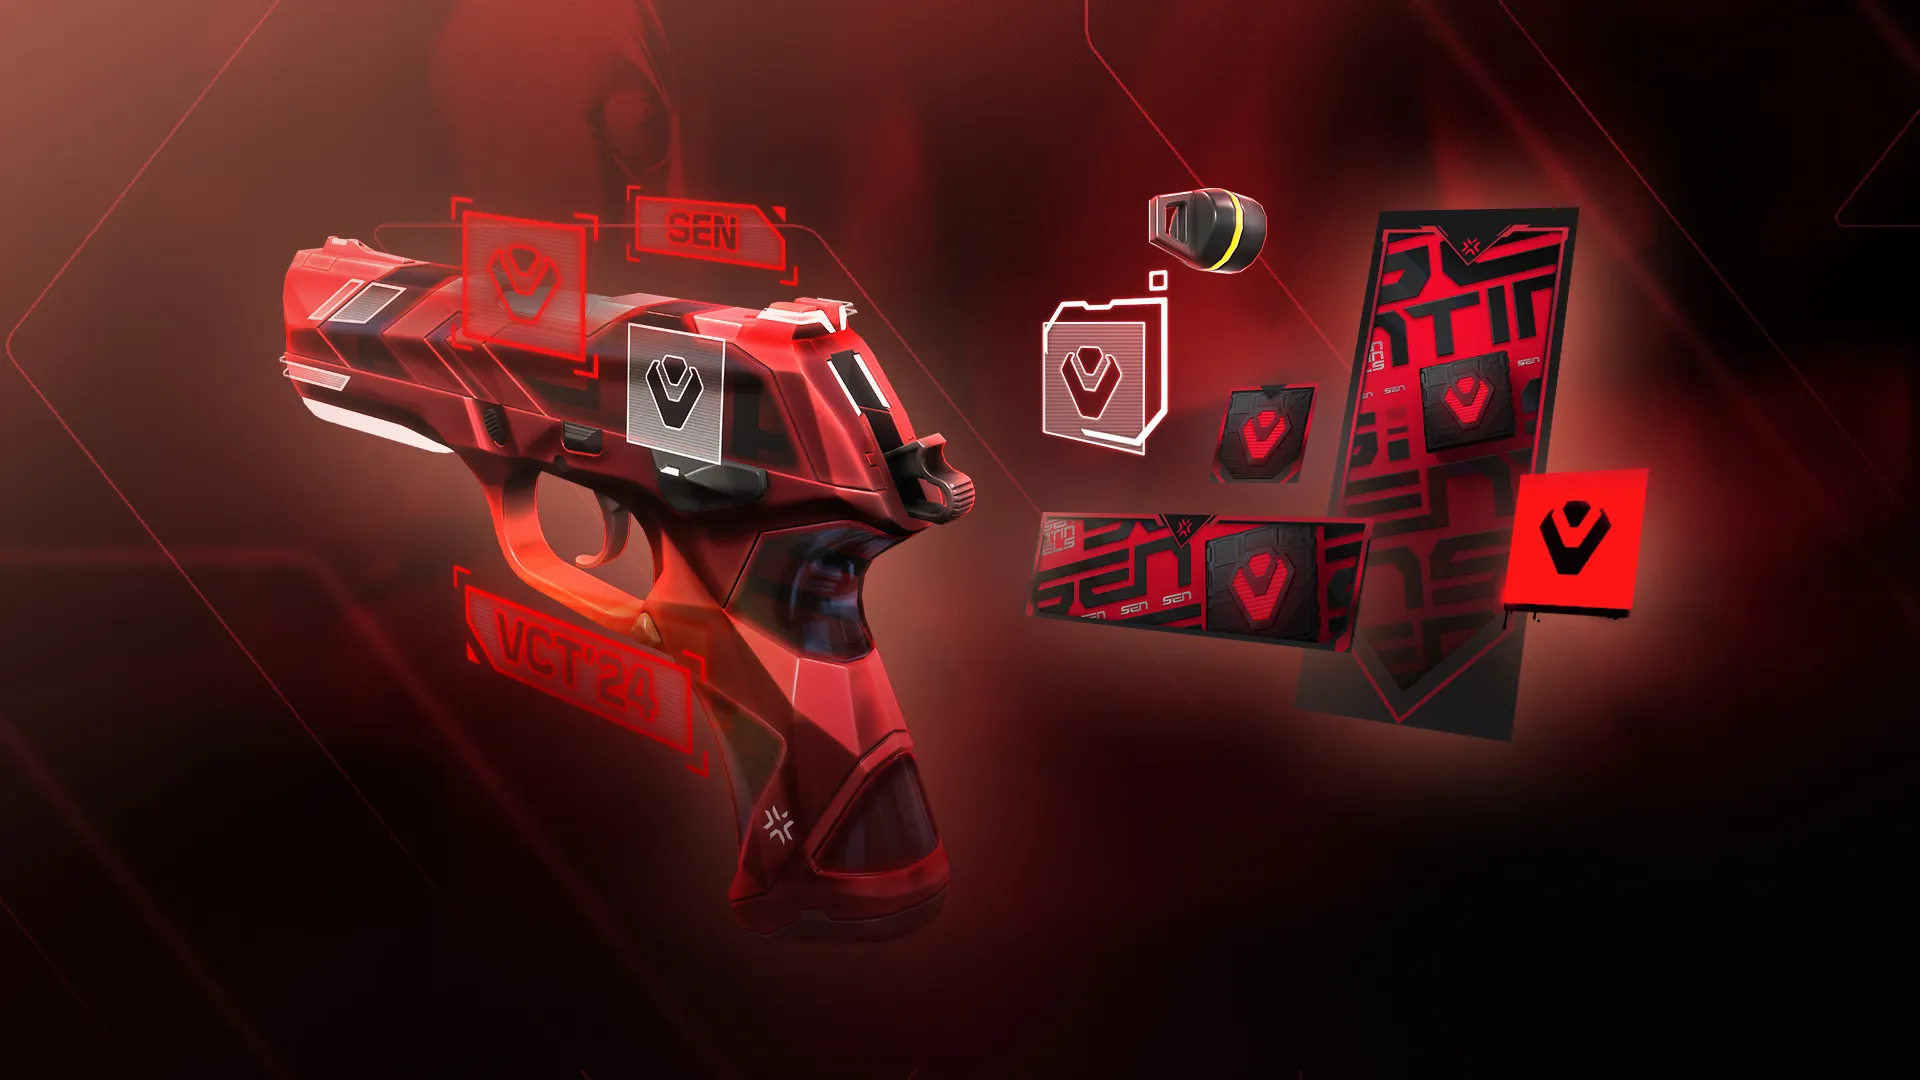 VALORANT Store Now Offers VCT-Themed Skins, Gun Buddies, and More